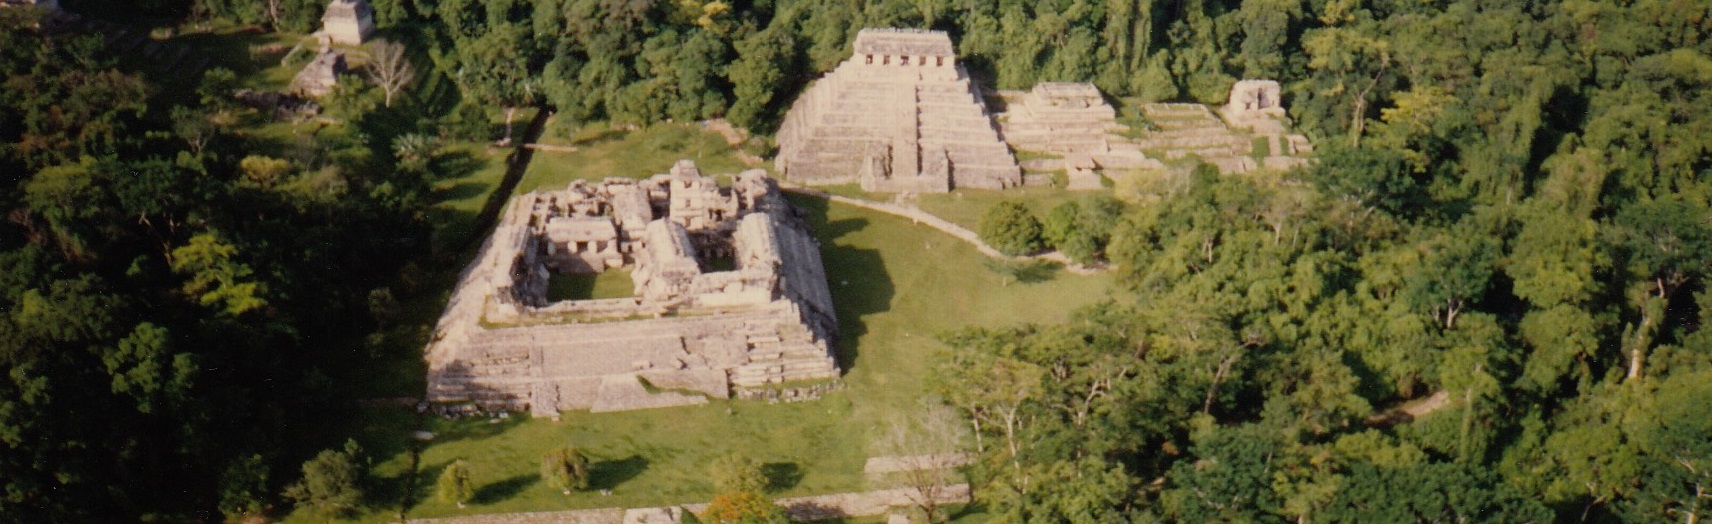 Palenque from air